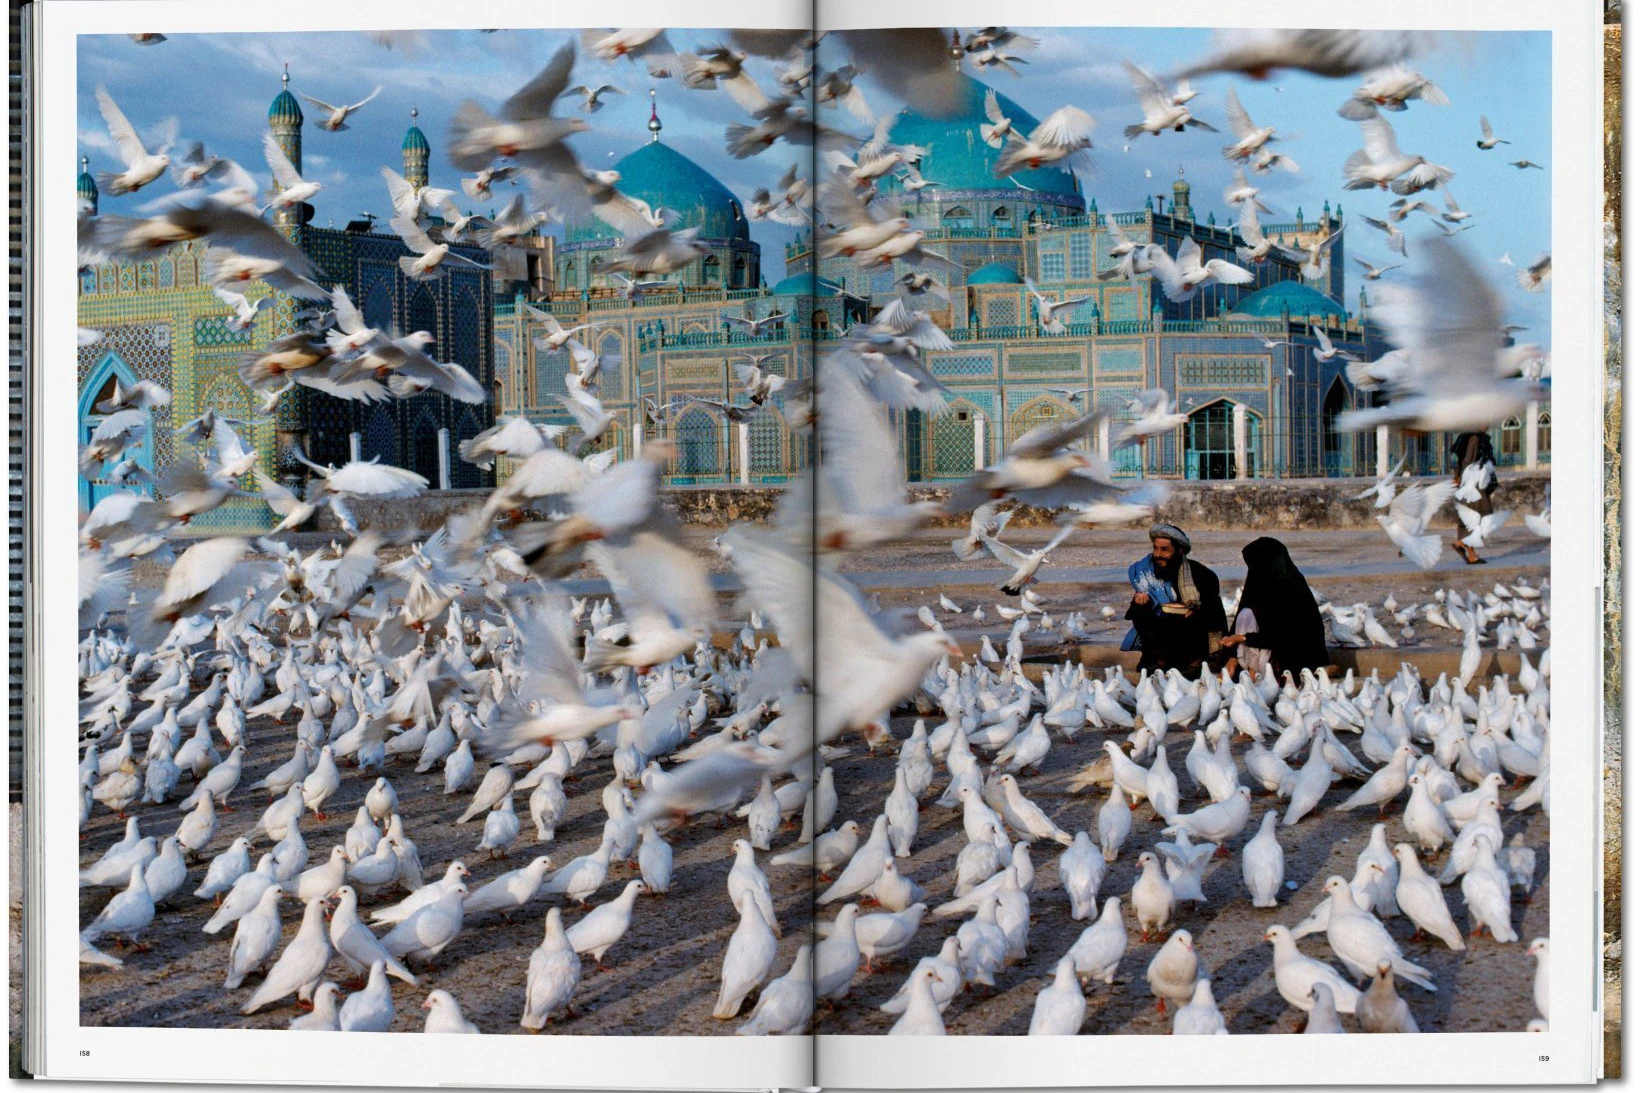 two humans sitting among birds in front of a mosque - photo by Steve McCurry.